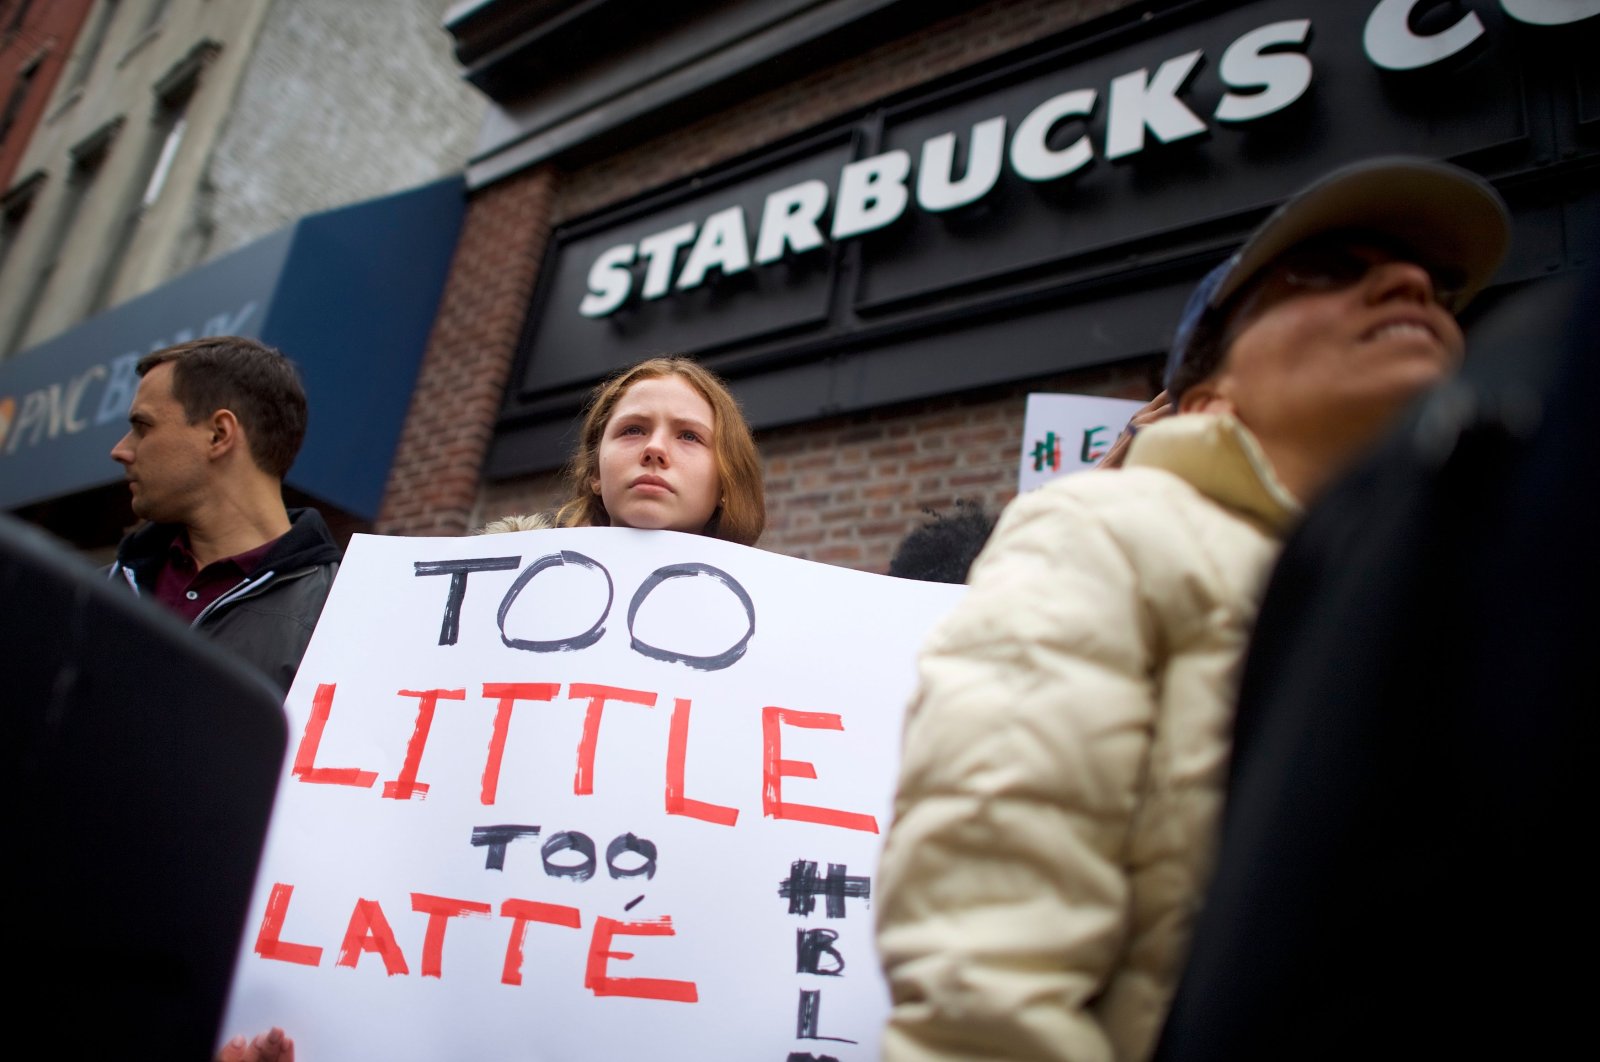  In this file photo taken on April 15, 2018, protesters demonstrate outside a Starbucks in Philadelphia, Pennsylvania. (AFP Photo)